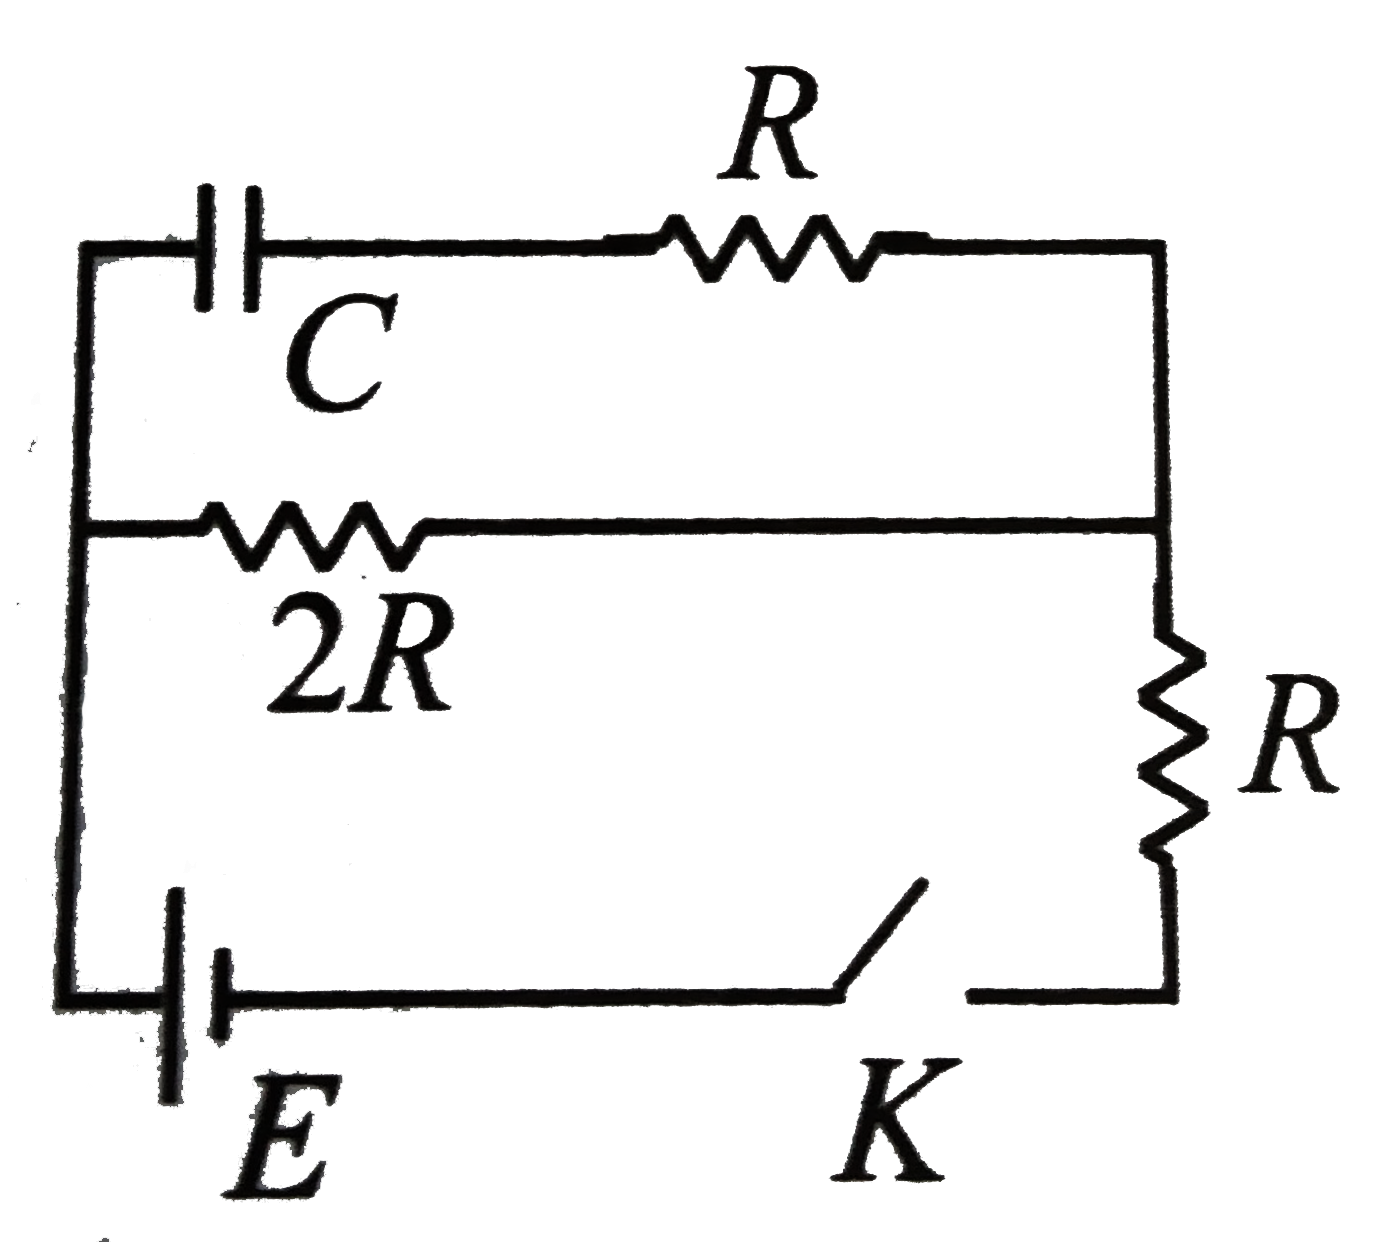 In the given circuit, the capacitor of capacitance C is charged by closing key K at t = 0. Find the time required to charge the capacitor up to the maximum charge for the given circuit, if it were to be charged with the charged with constant initial charging rate at t = 0 in the given circuit.